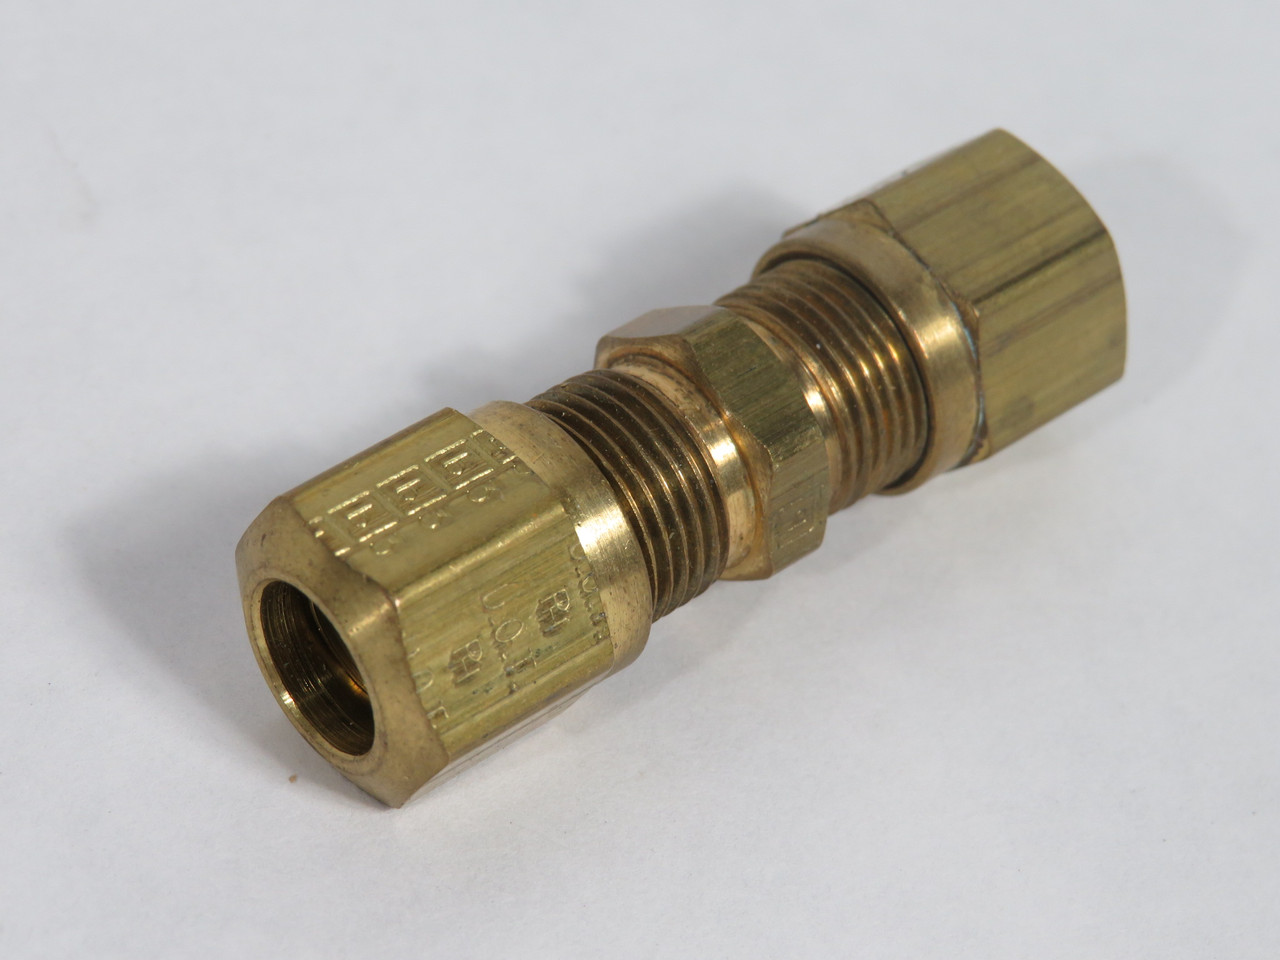 Generic Brass Compression Fitting 1/4 Male NPT 3/8 Tube OD Lot of 4 USED  - Industrial Automation Canada